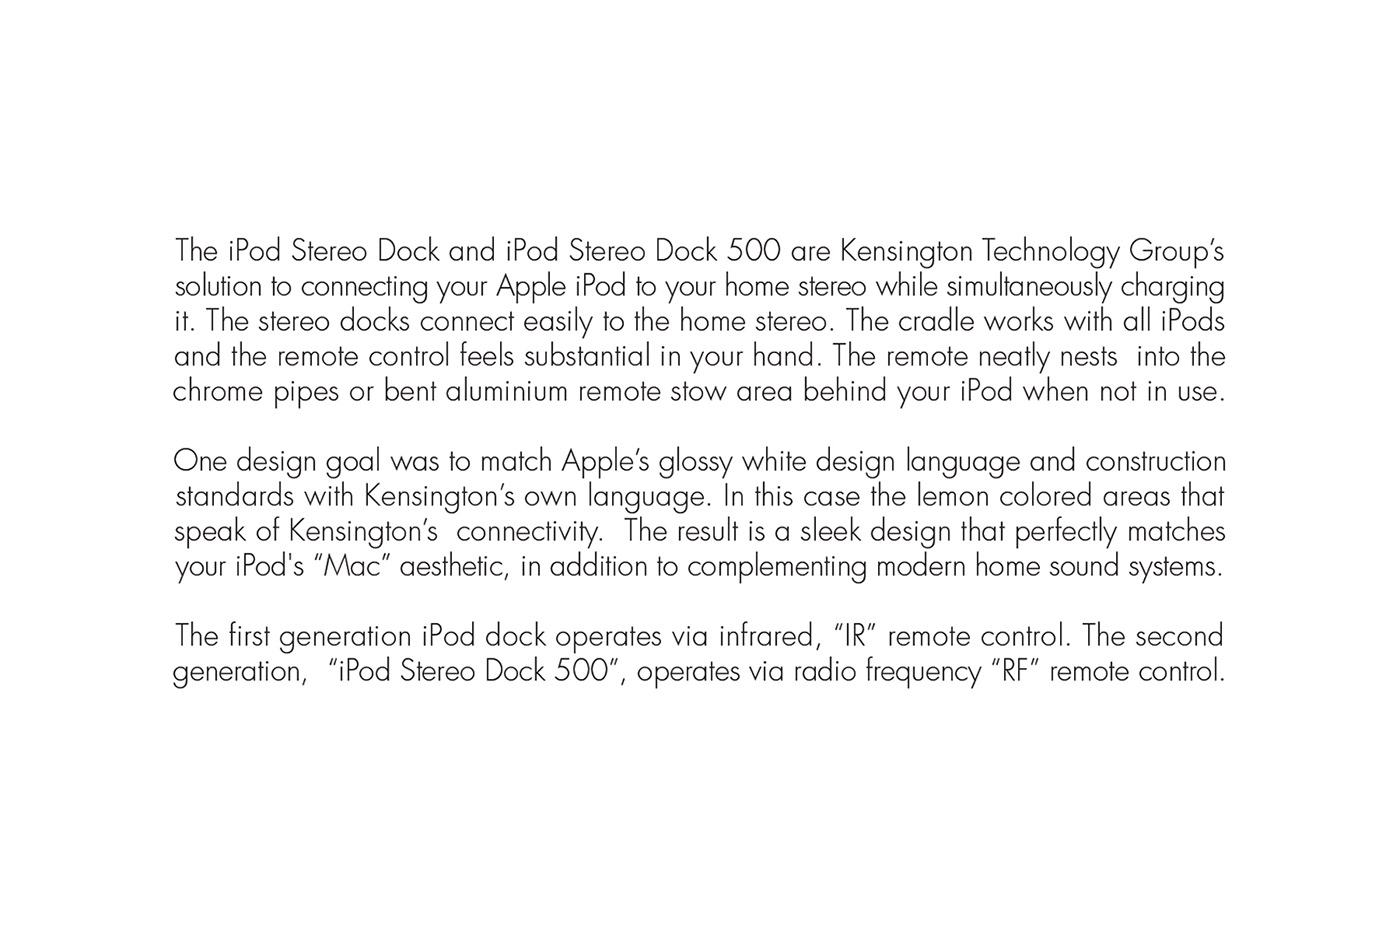 apple cmf electronic devices Handheld Devices industrial design  ipod kensington product design  Design Concepts sketching